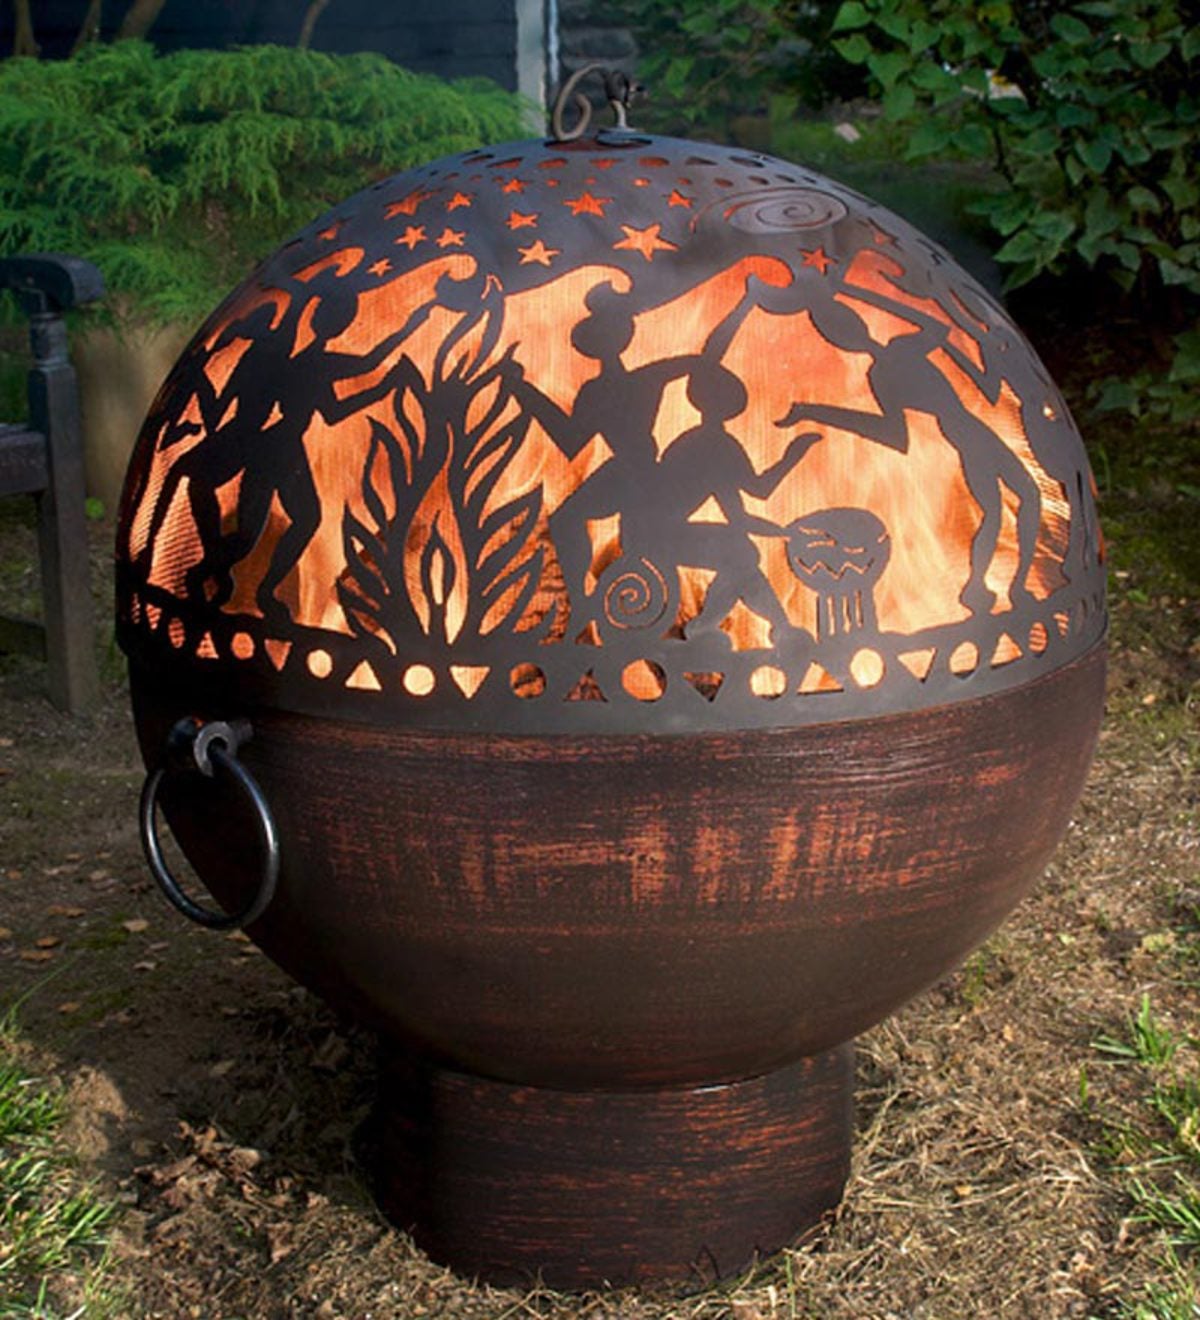 Weather-Resistant Large Outdoor Moon Party Fire Bowl With Cutouts